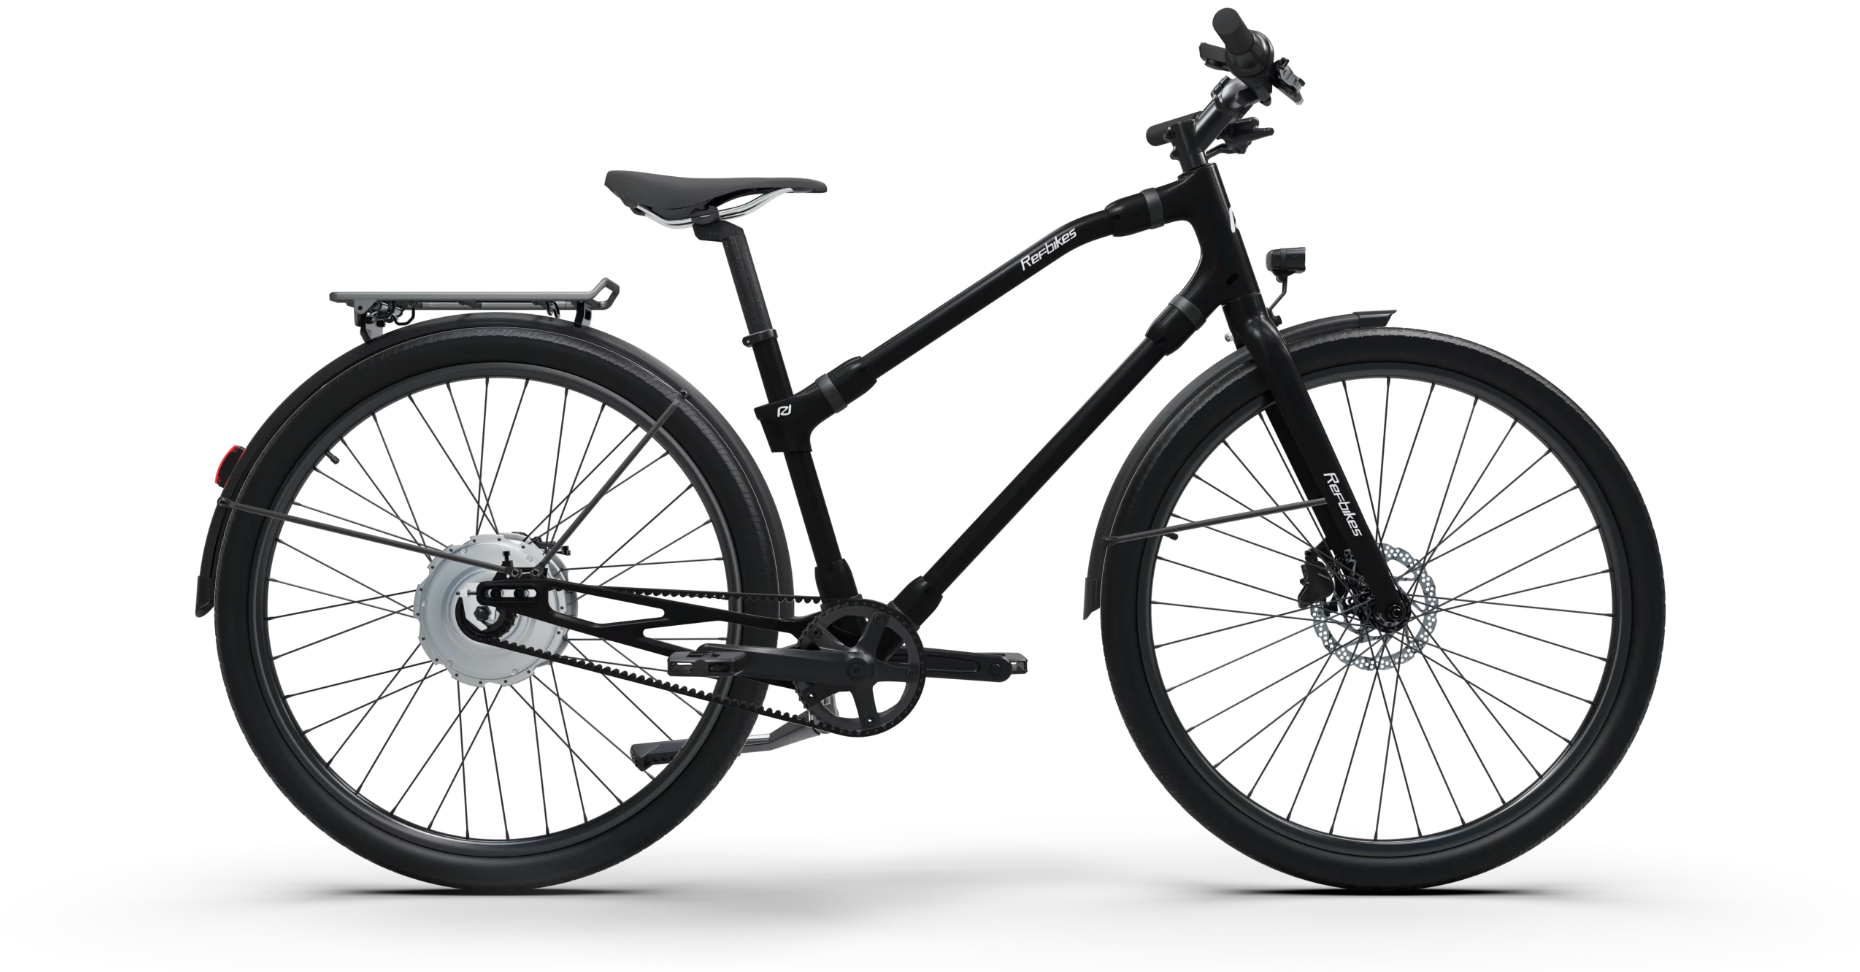 Ref Urban Boost bike in classic black with advanced features for the urban cyclist.